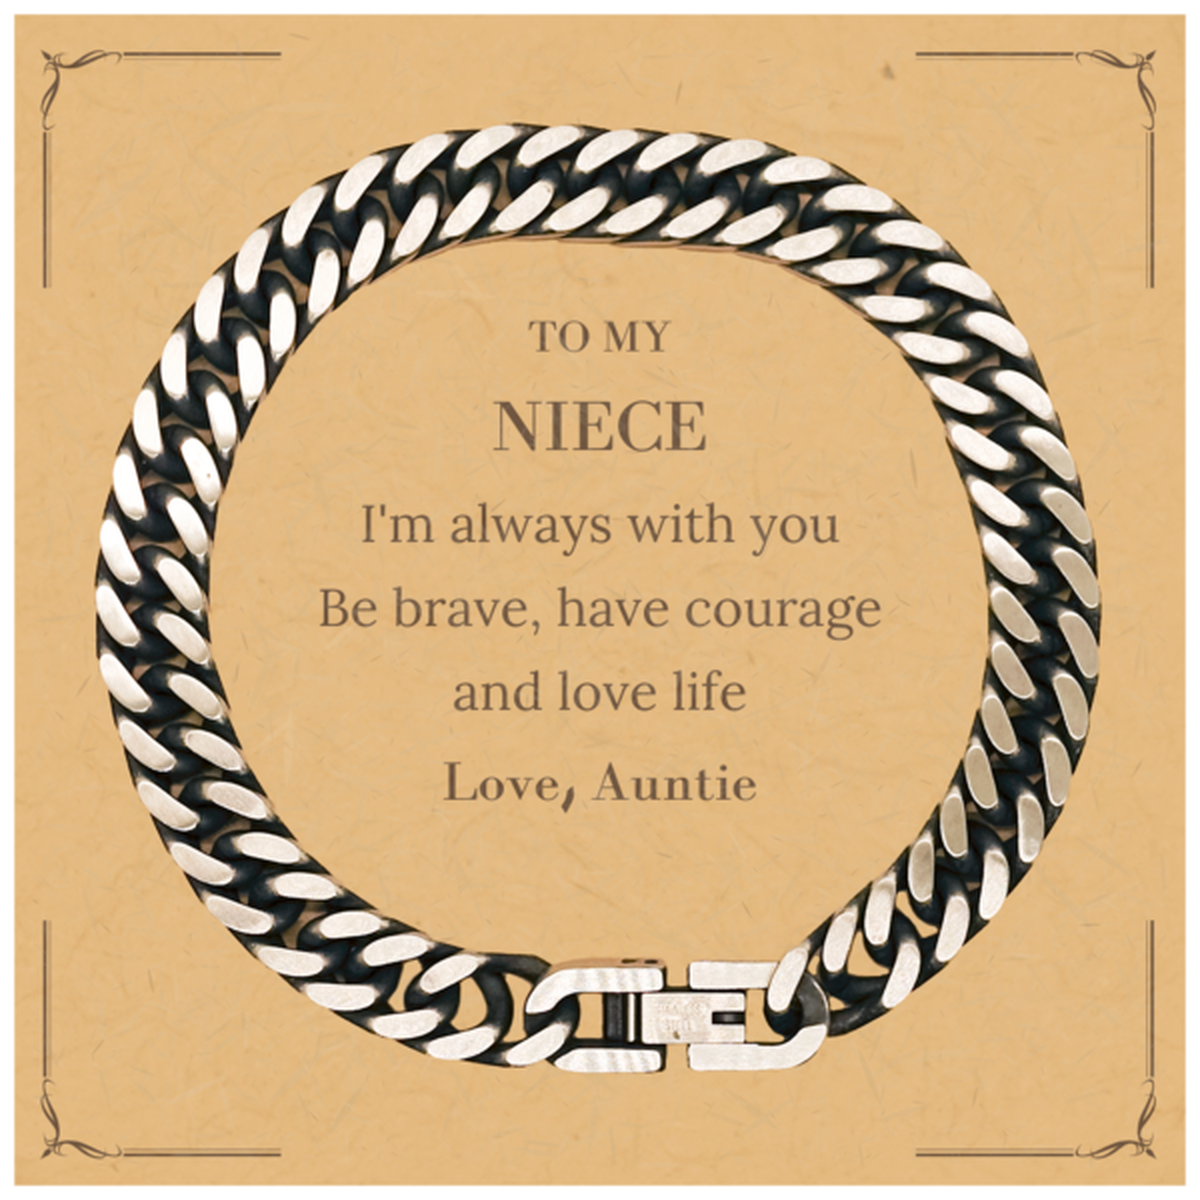 To My Niece Gifts from Auntie, Unique Cuban Link Chain Bracelet Inspirational Christmas Birthday Graduation Gifts for Niece I'm always with you. Be brave, have courage and love life. Love, Auntie